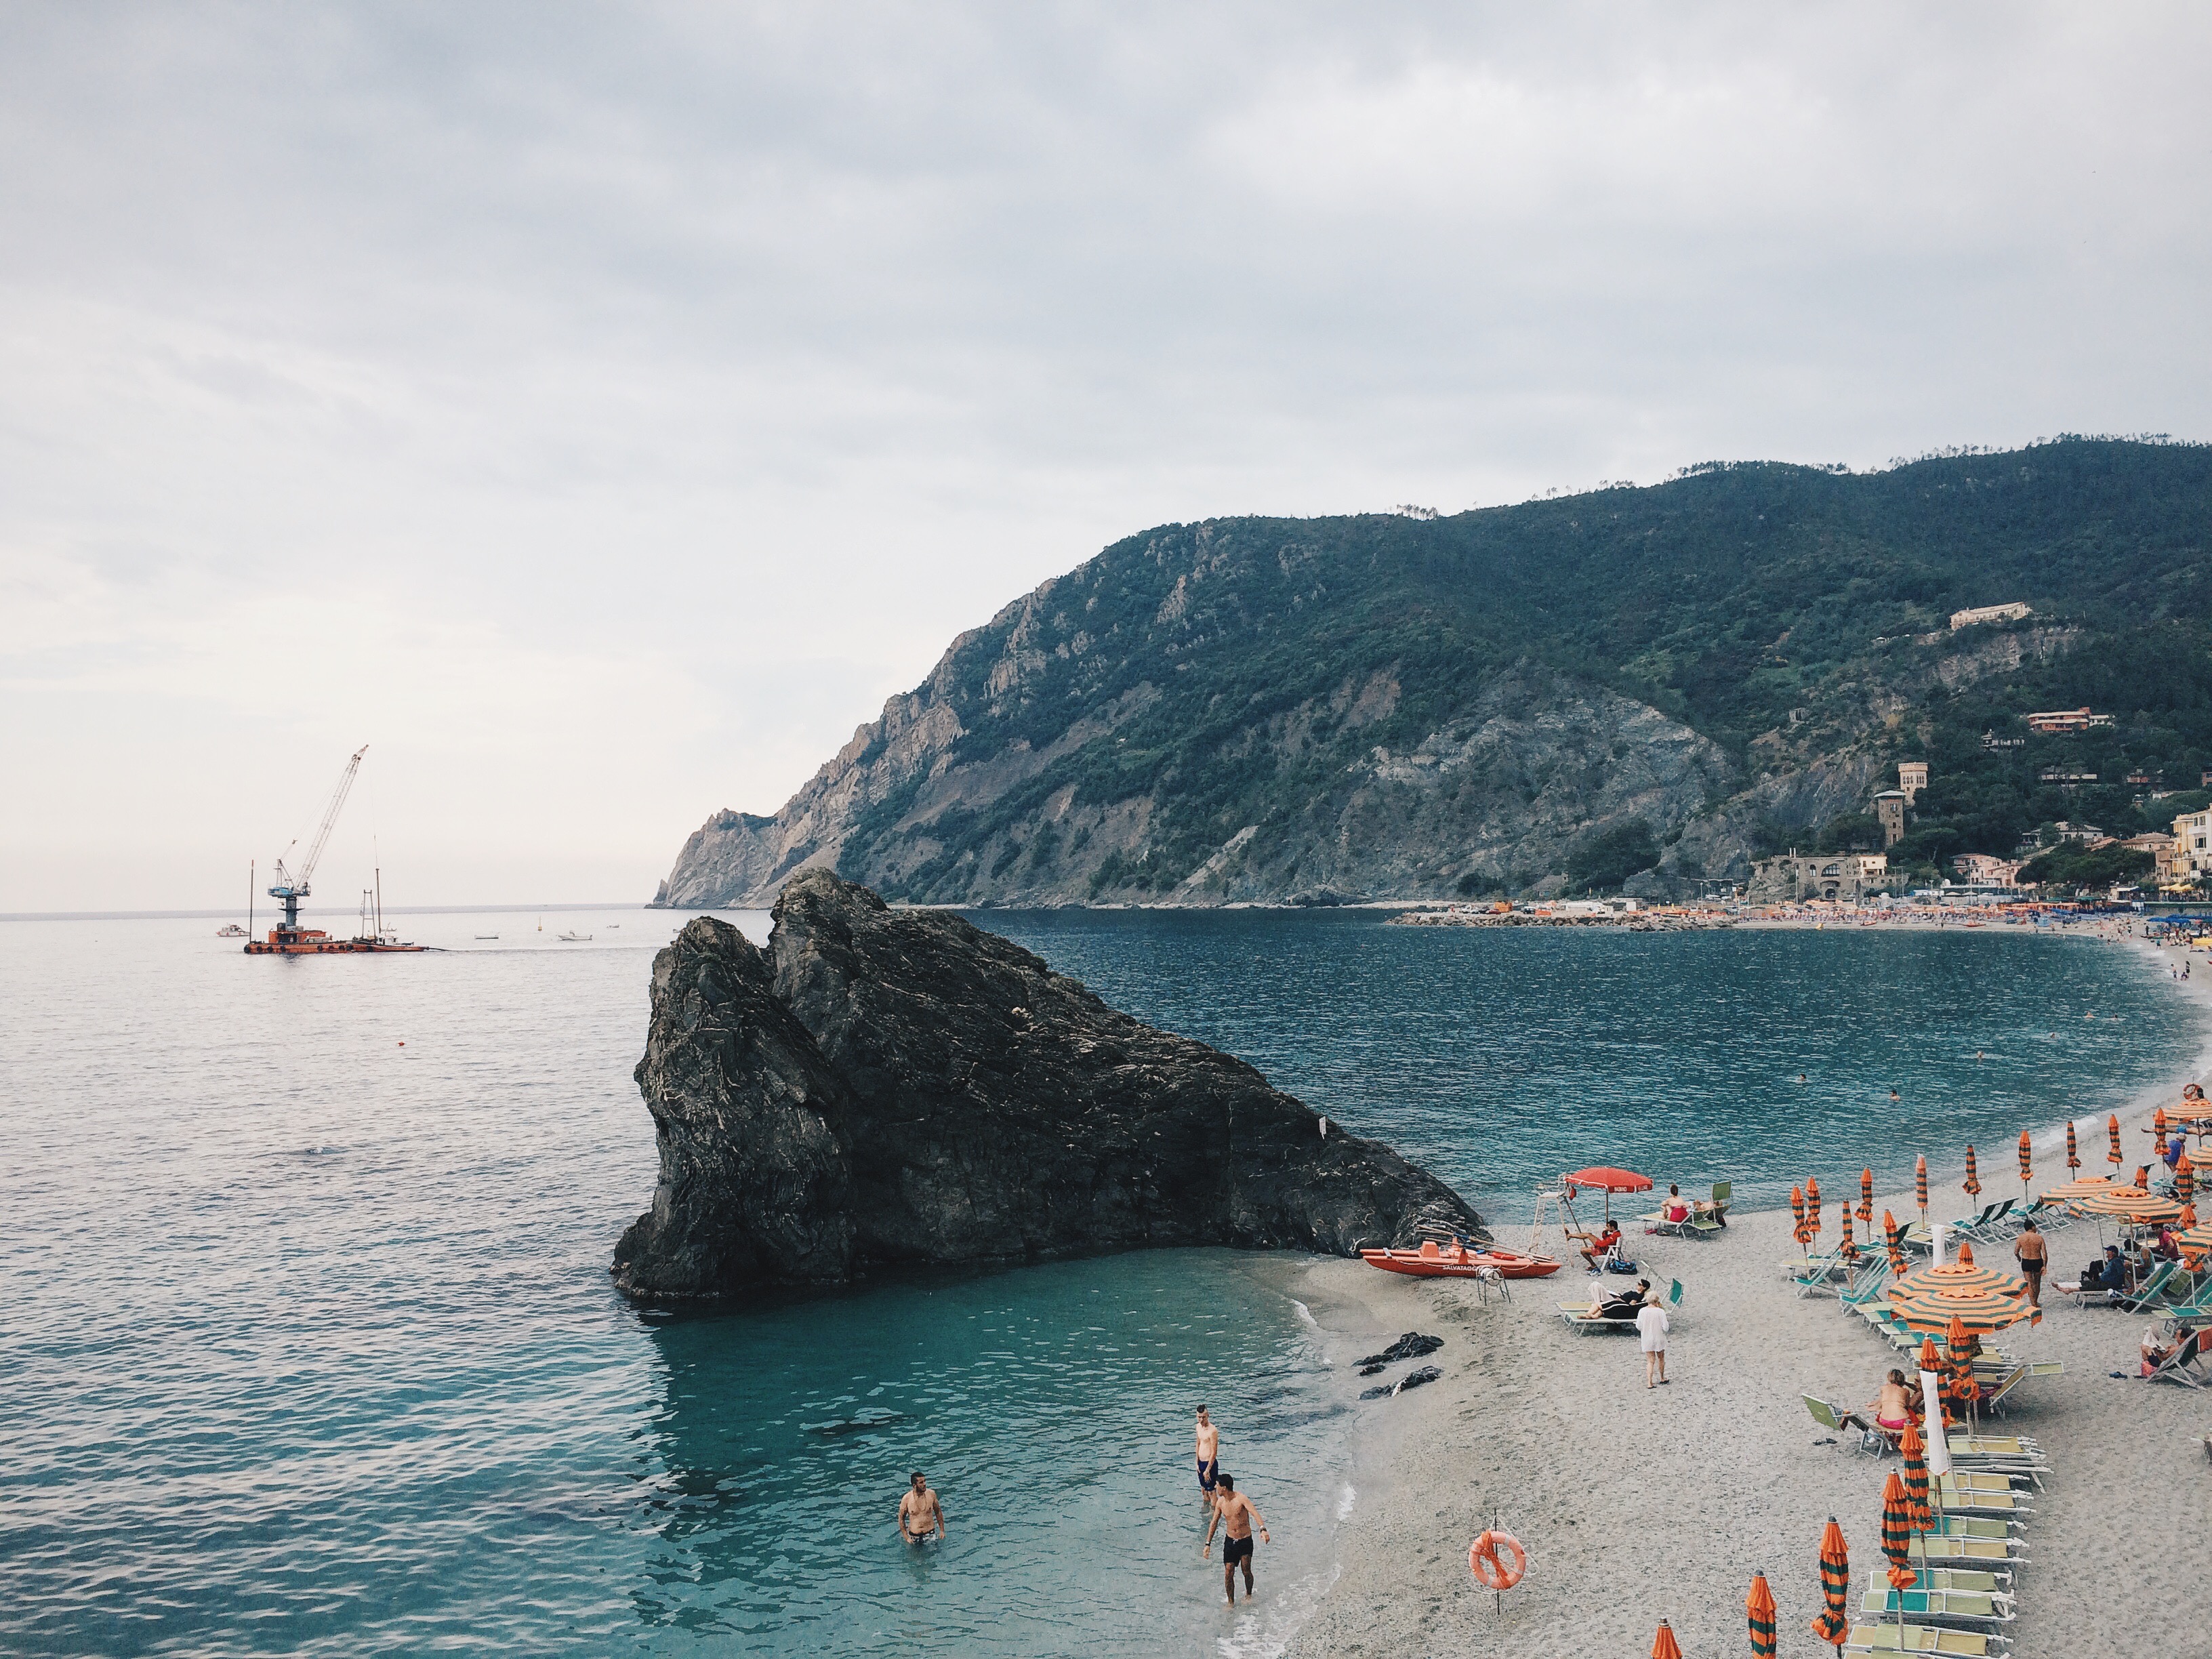 Cinque Terre: the sneak peek - The cat, you and us